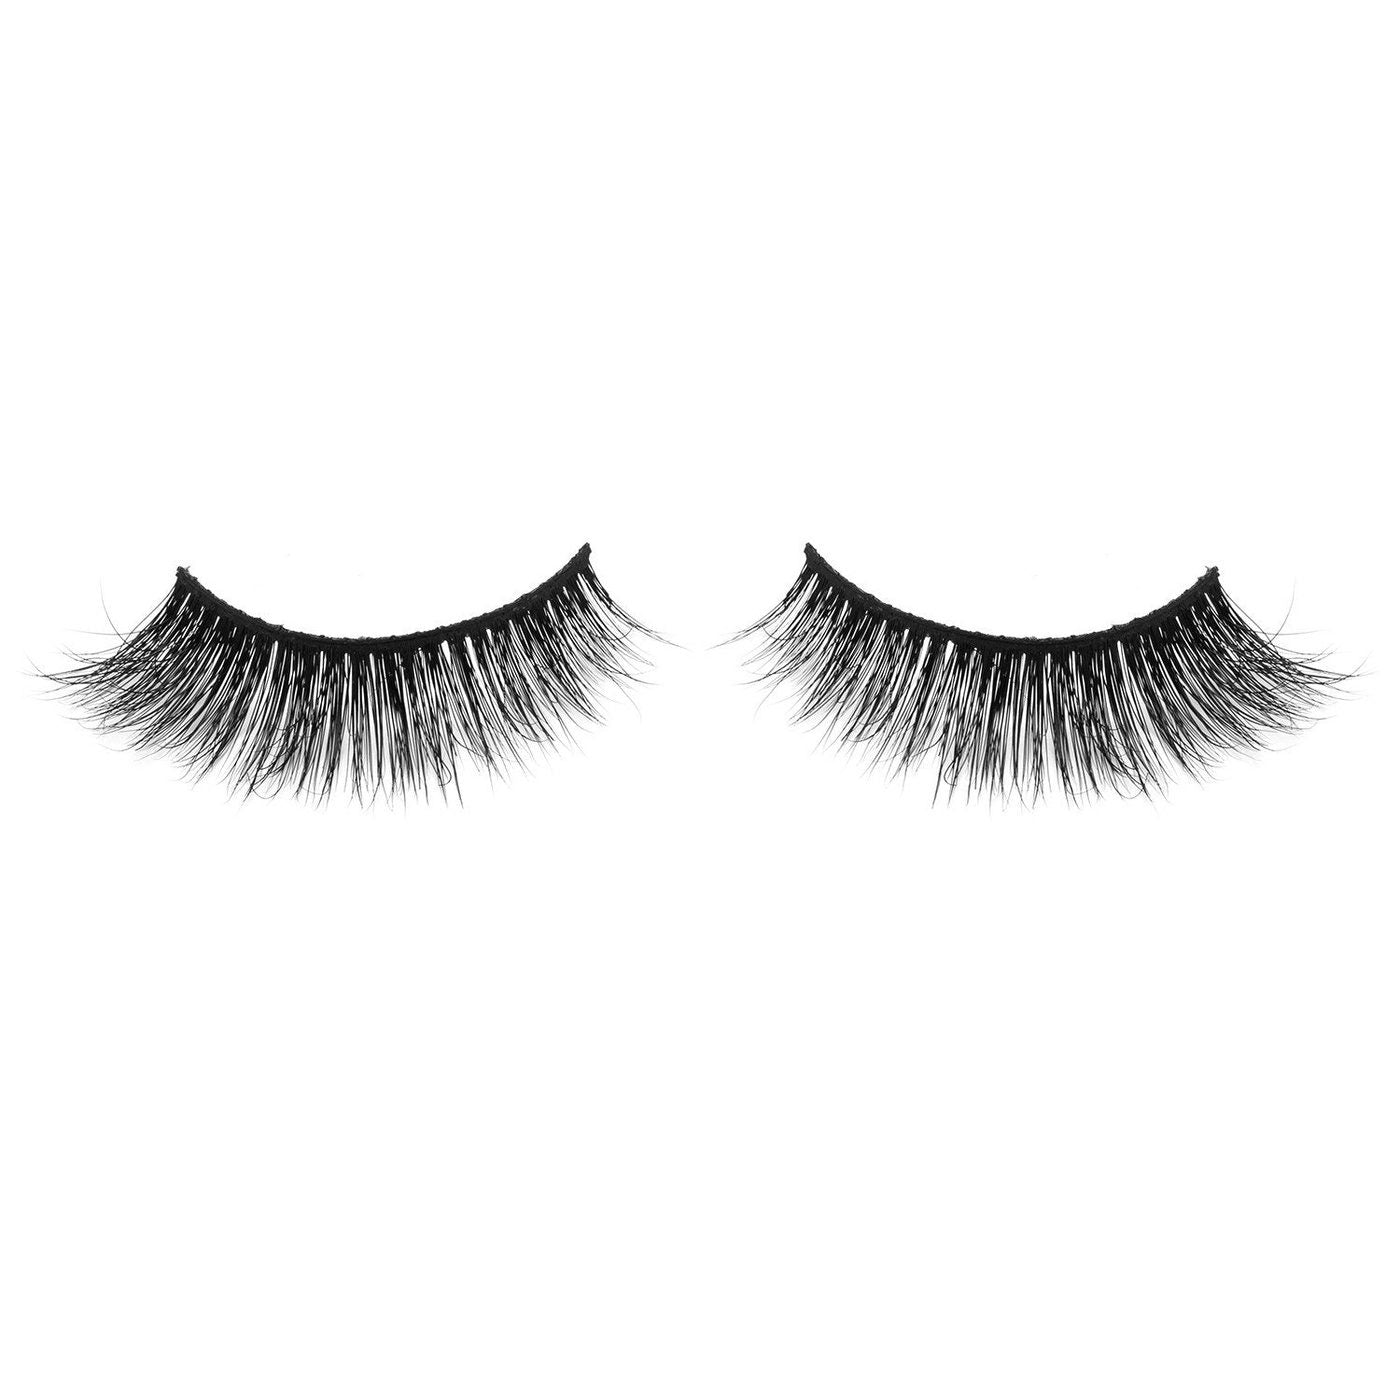 3D Mink Eyelashes - Attached